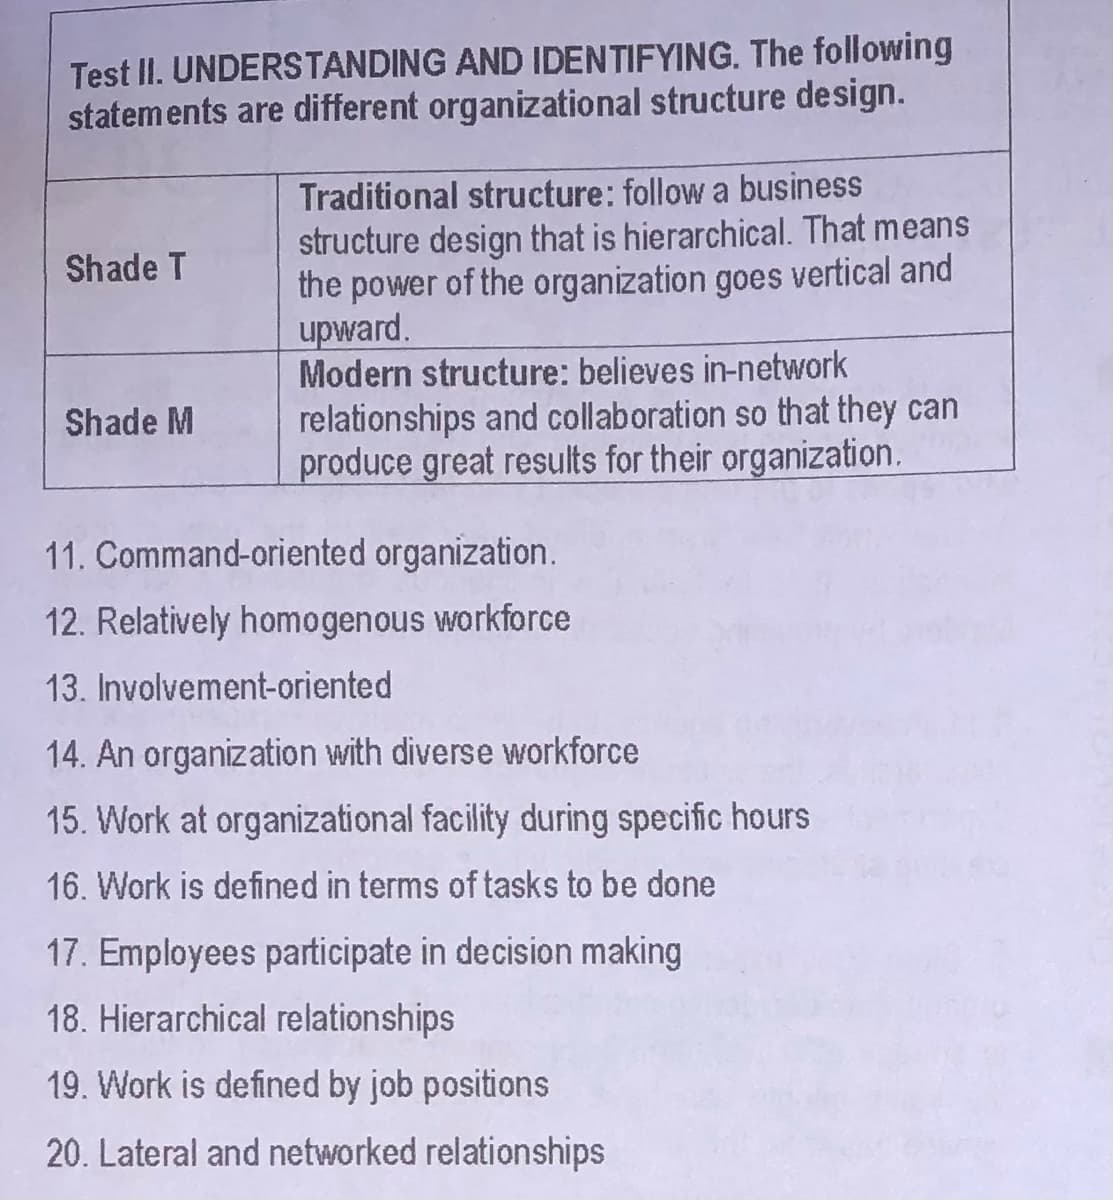 Test II. UNDERSTANDING AND IDENTIFYING. The following
statements are different organizational structure design.
Traditional structure: follow a business
structure design that is hierarchical. That means
the power of the organization goes vertical and
upward.
Modern structure: believes in-network
relationships and collaboration so that they can
produce great results for their organization.
Shade T
Shade M
11. Command-oriented organization.
12. Relatively homogenous workforce
13. Involvement-oriented
14. An organization with diverse workforce
15. Work at organizational facility during specific hours
16. Work is defined in terms of tasks to be done
17. Employees participate in decision making
18. Hierarchical relationships
19. Work is defined by job positions
20. Lateral and networked relationships
